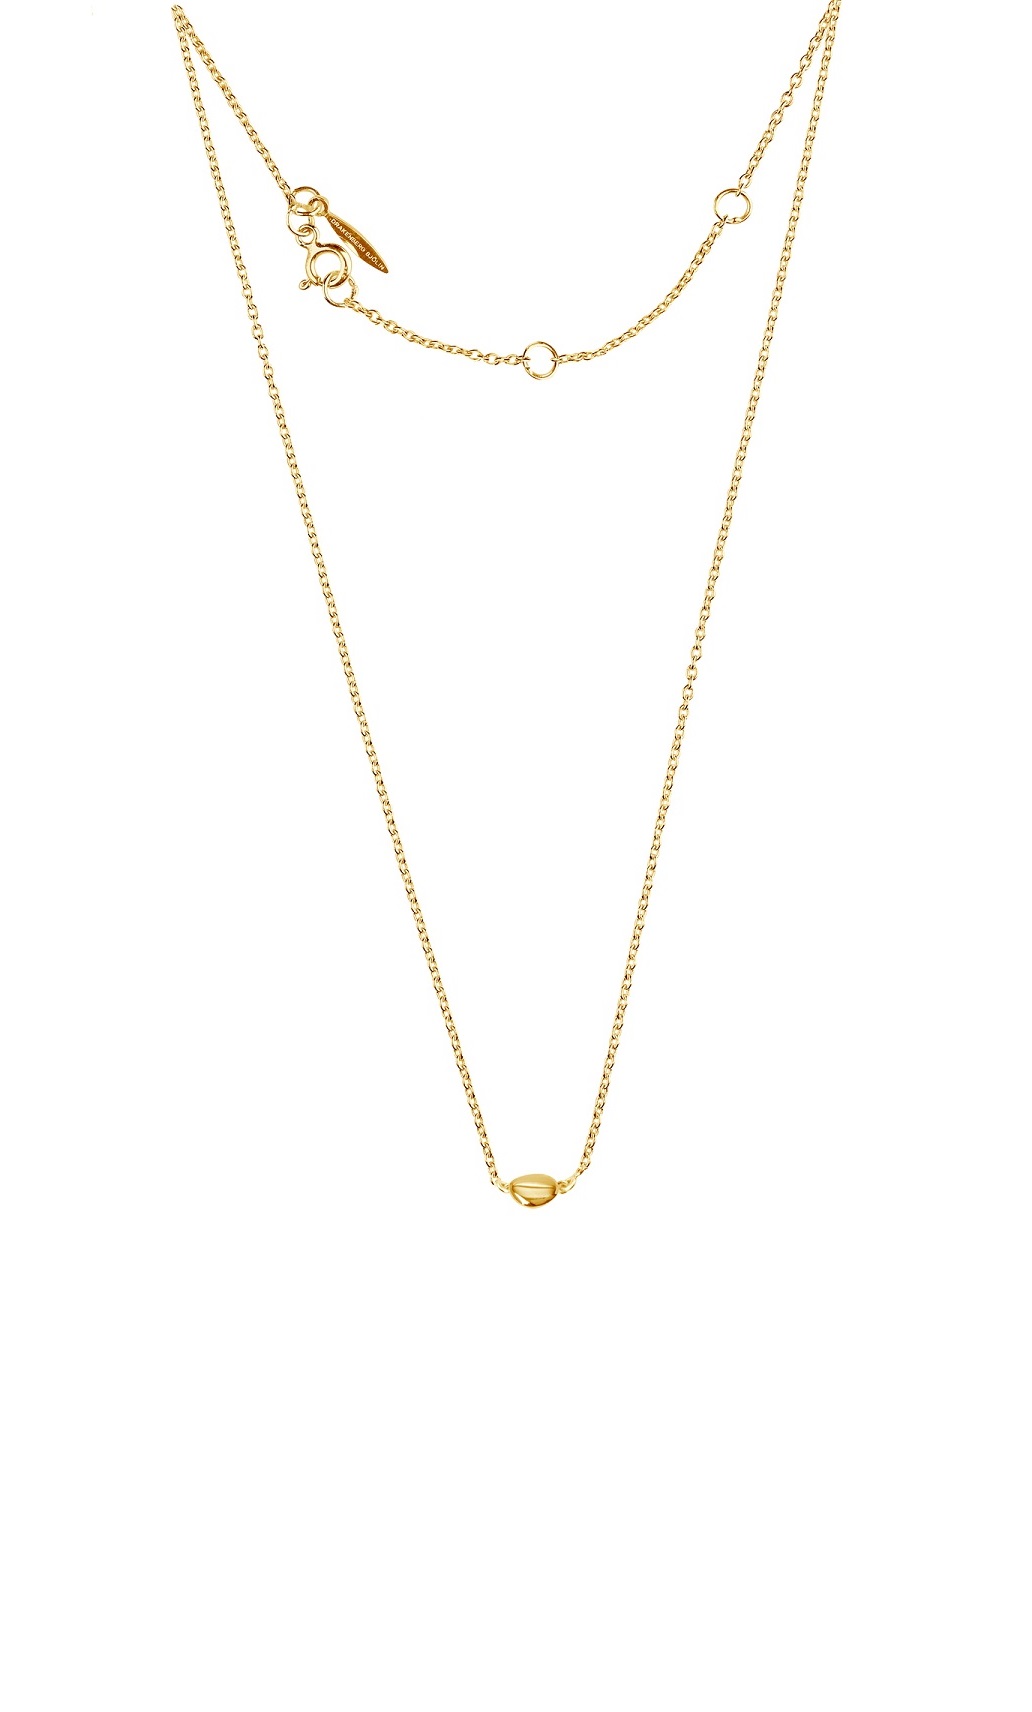 Morning dew petite necklace gold